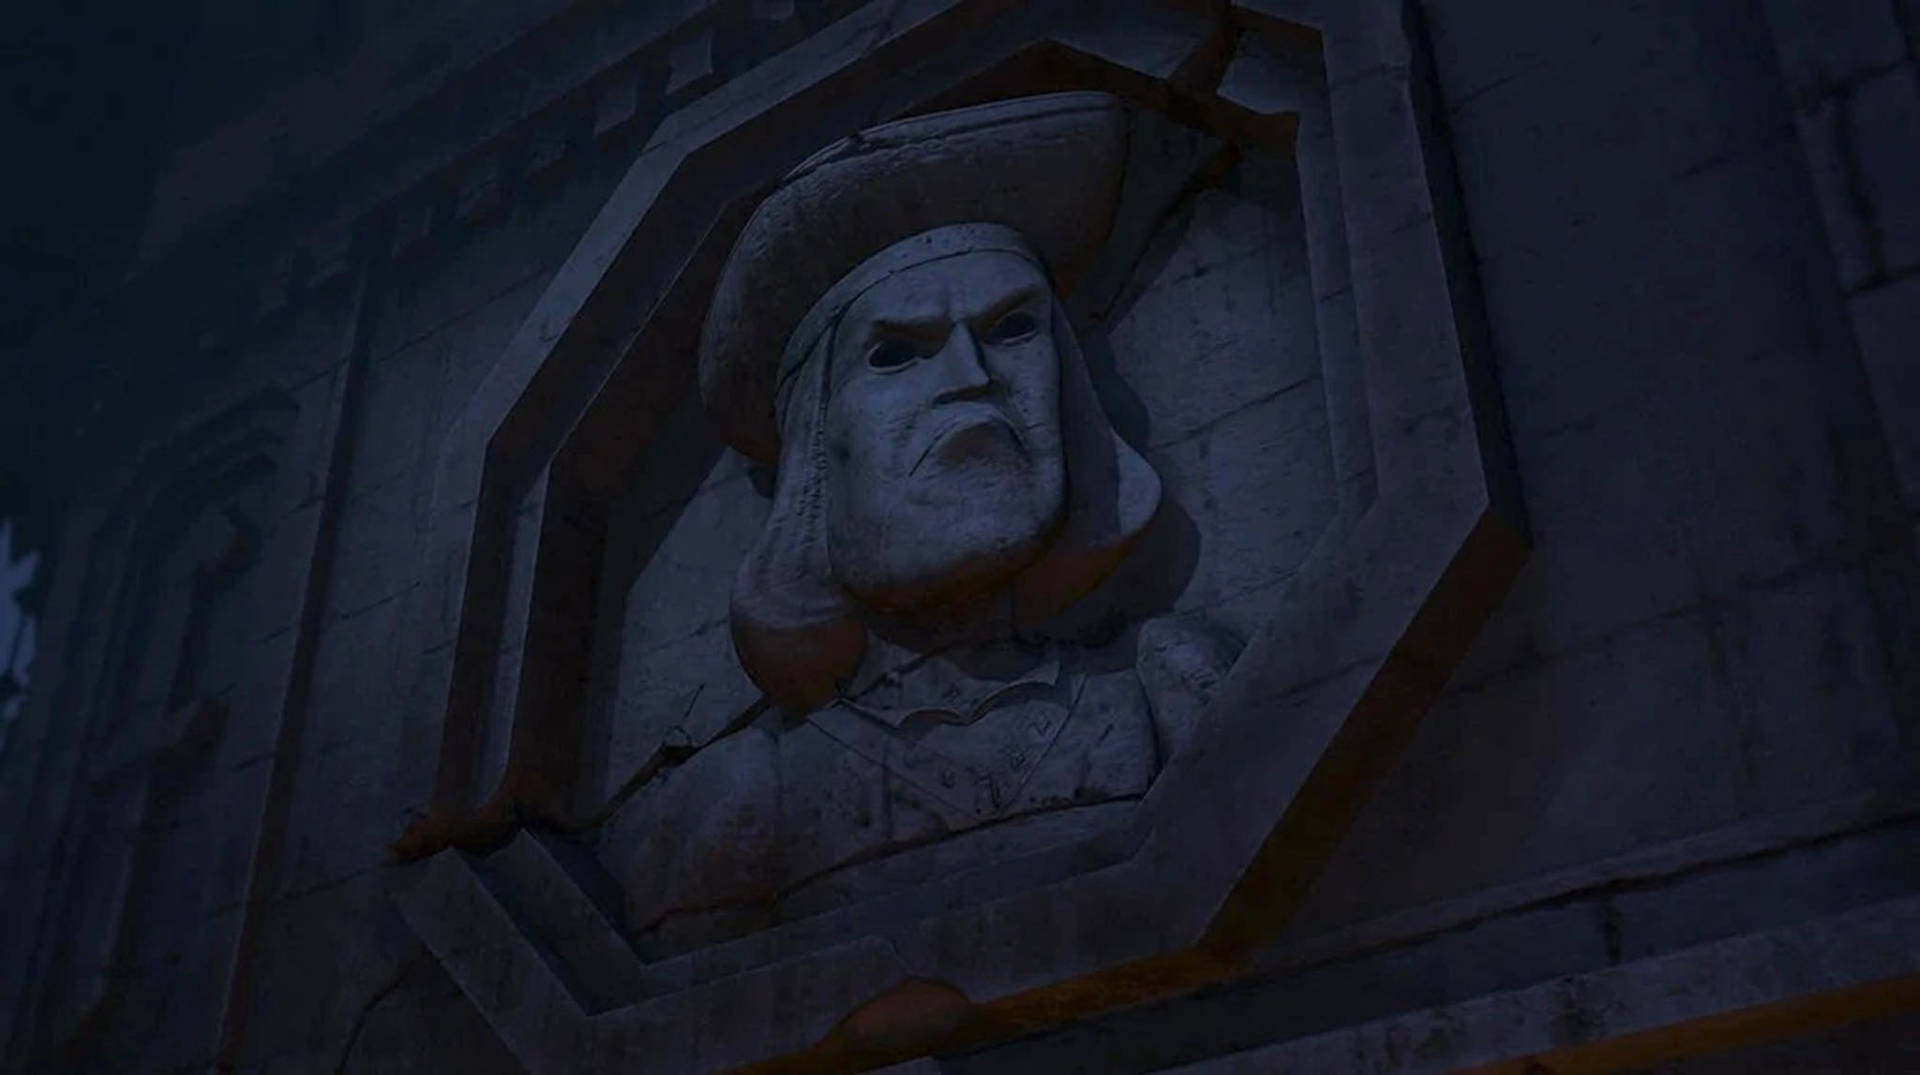 Pissed Lord Farquaad Statue Background